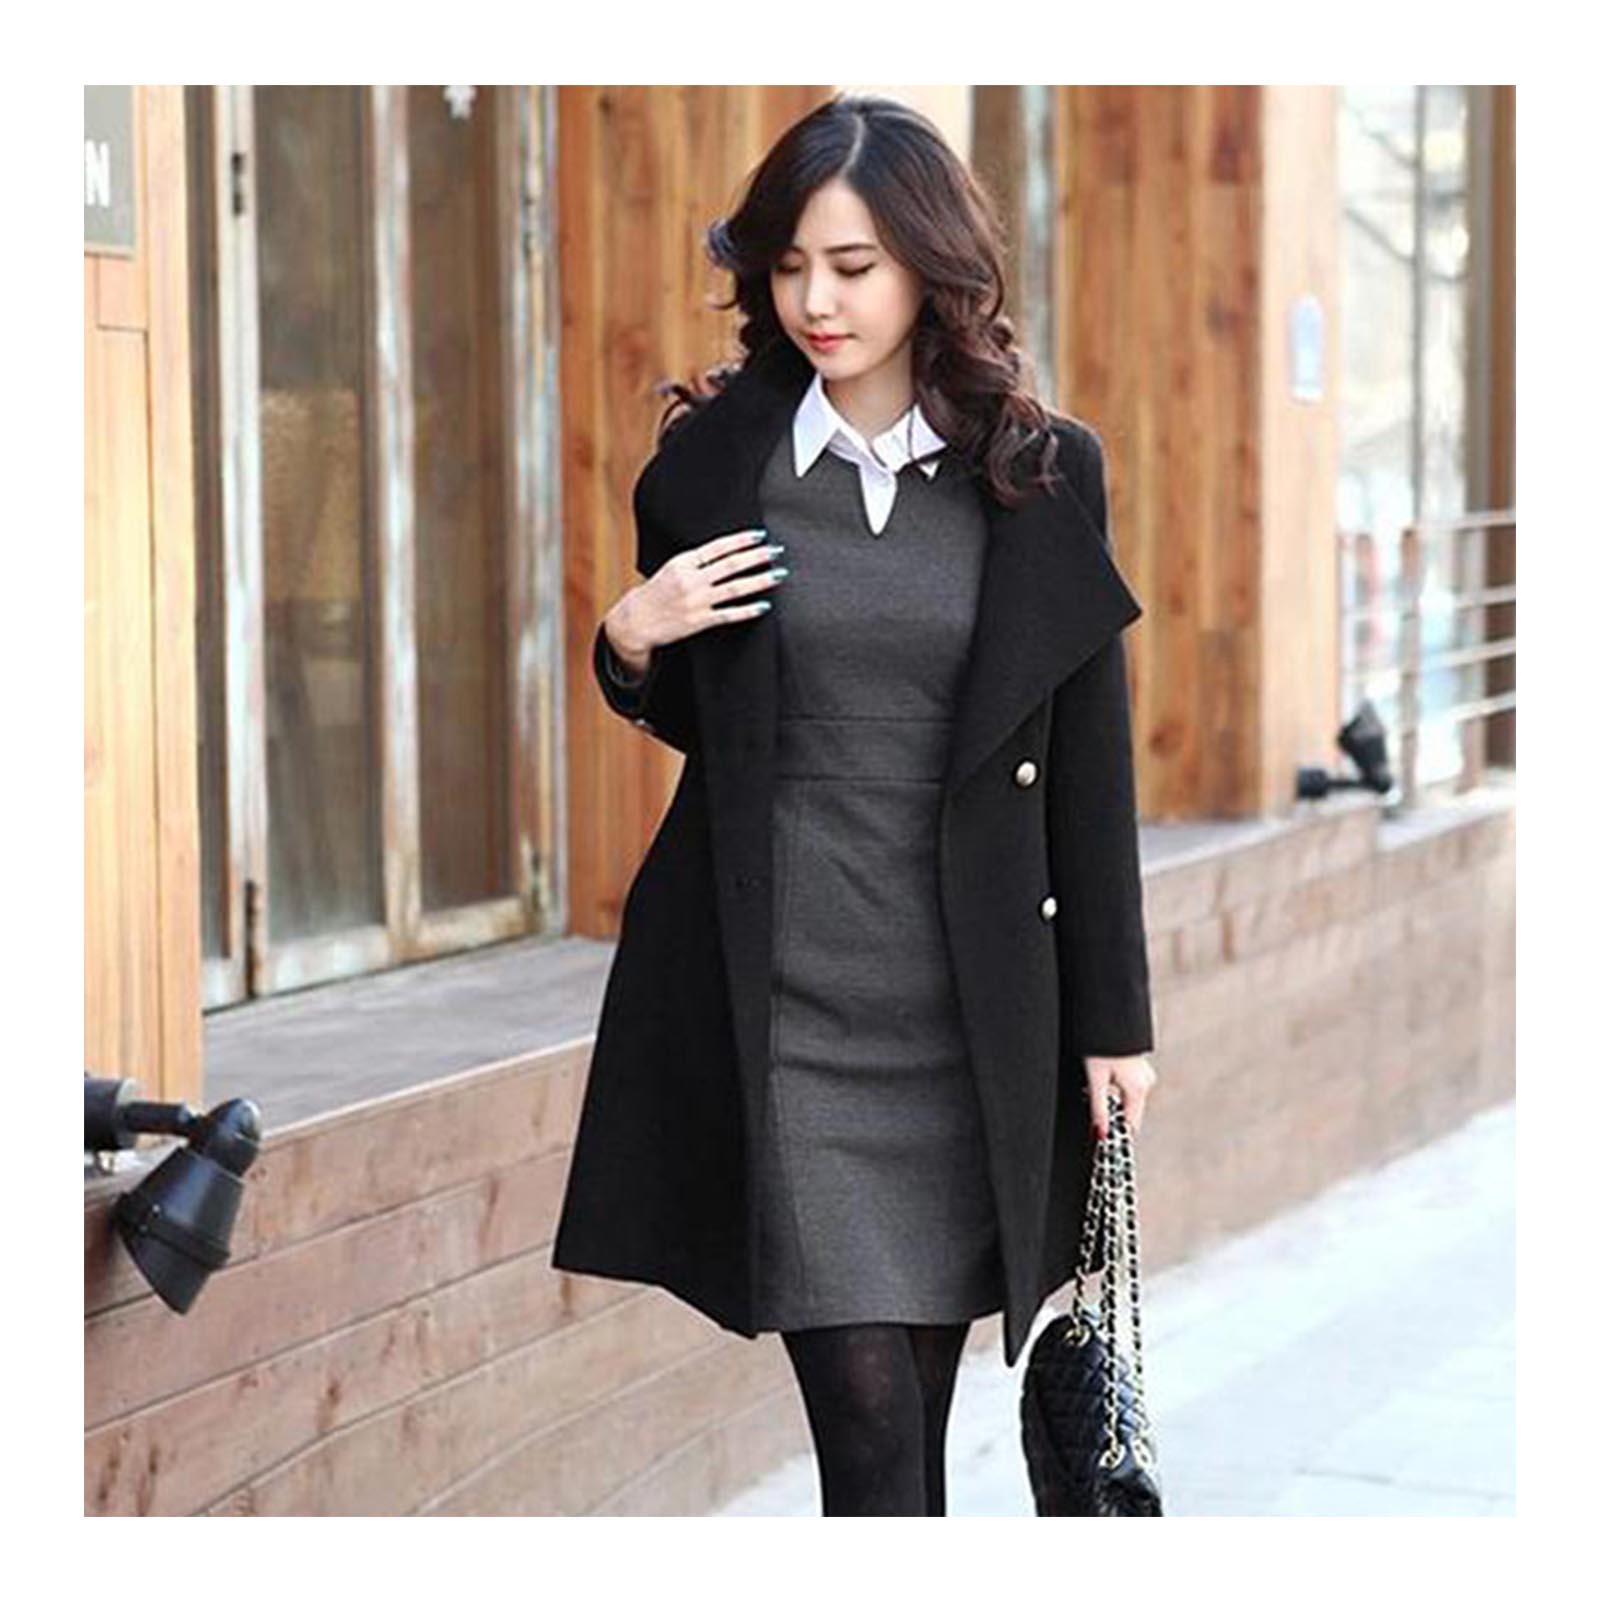 Winter Pea Coat Felt Long Jacket for Women Single Breasted Stand Collar S-L - image 1 of 2